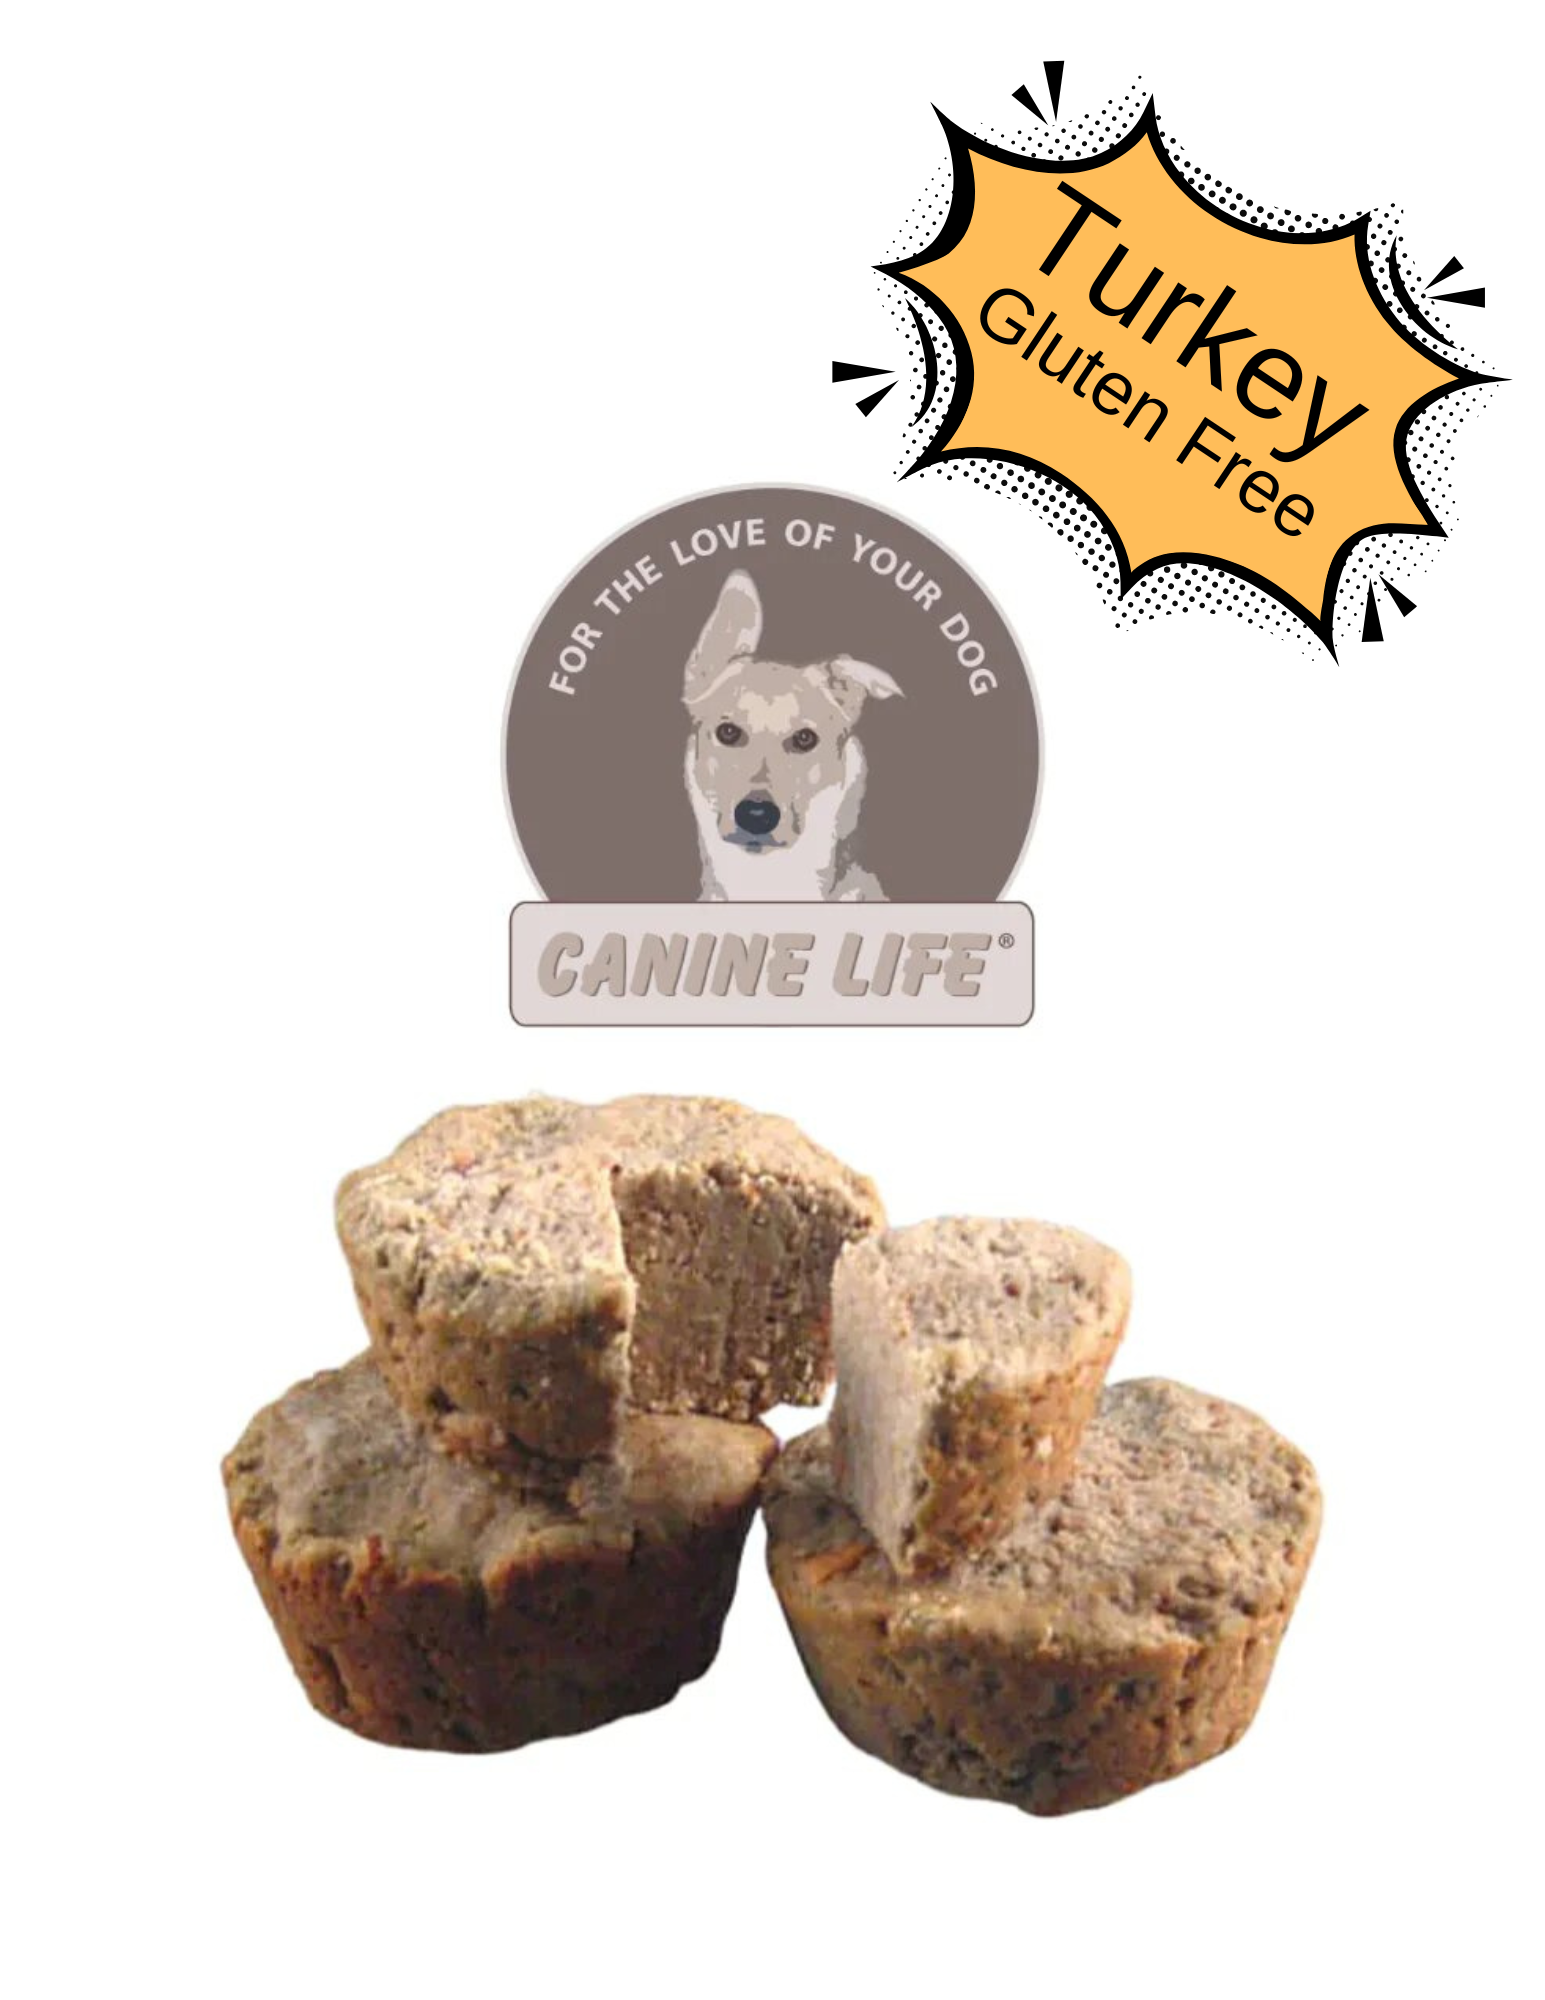 Canine Life - Turkey Gluten Free Recipe (For Dogs) - Frozen Product